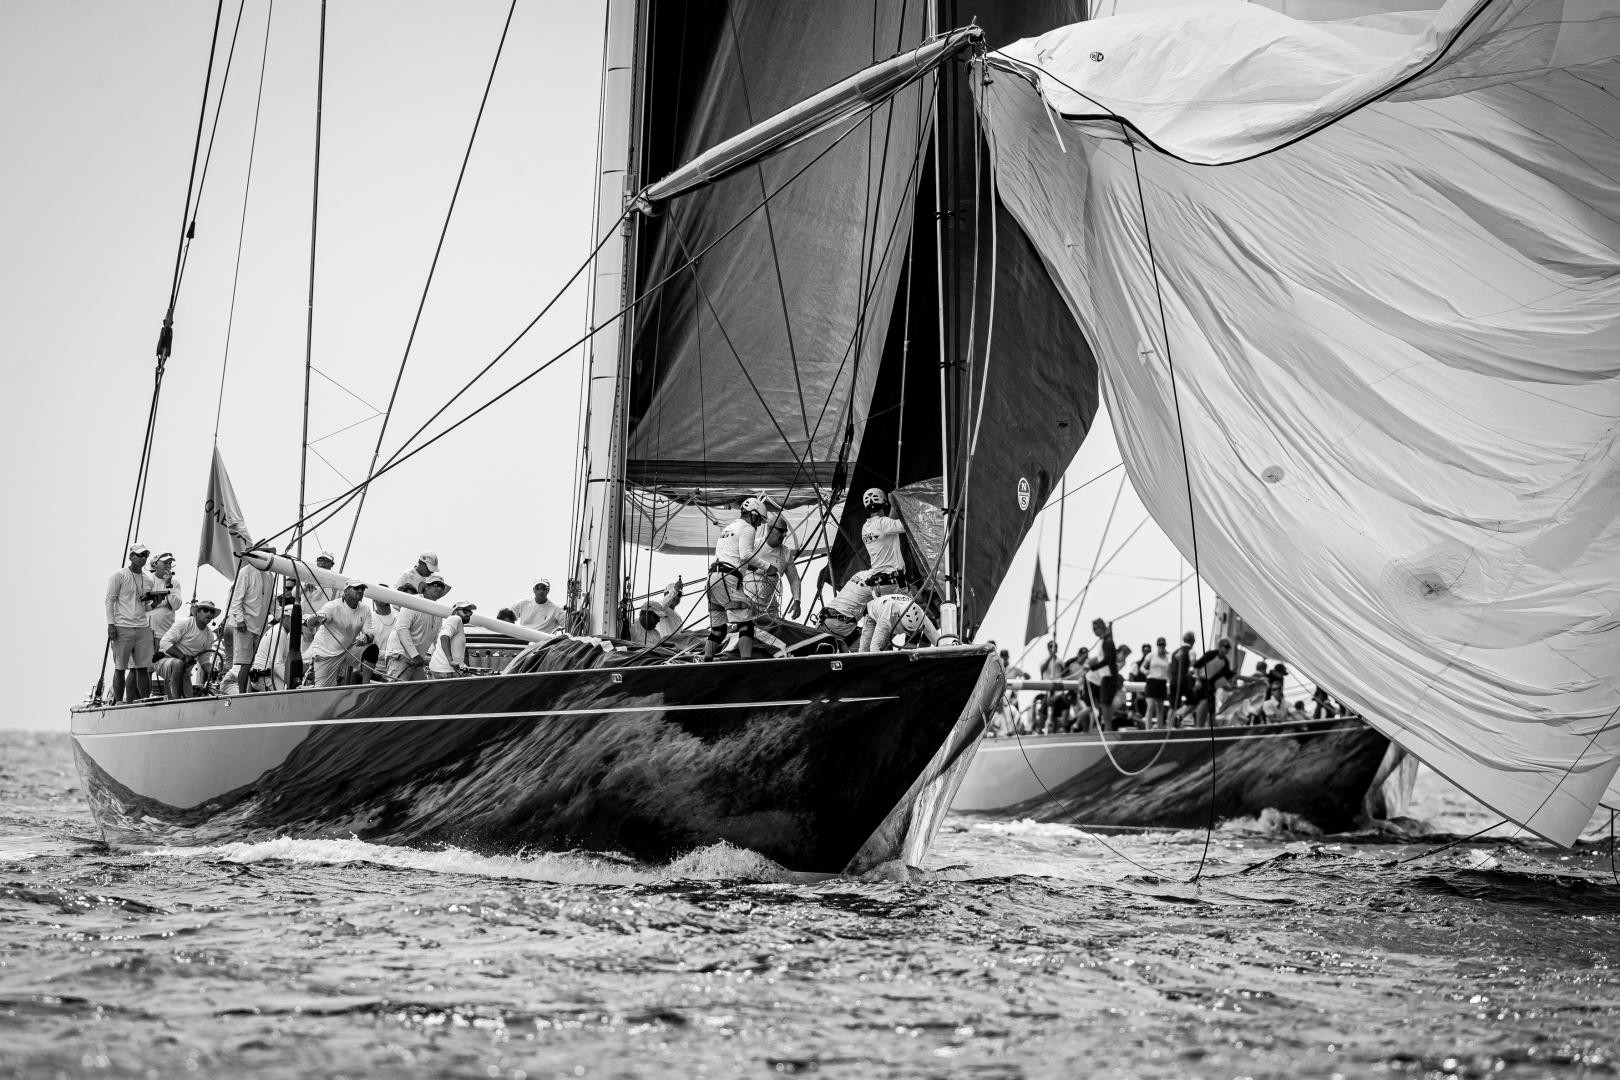 Win Win lives up to her name at the Superyacht Cup Palma